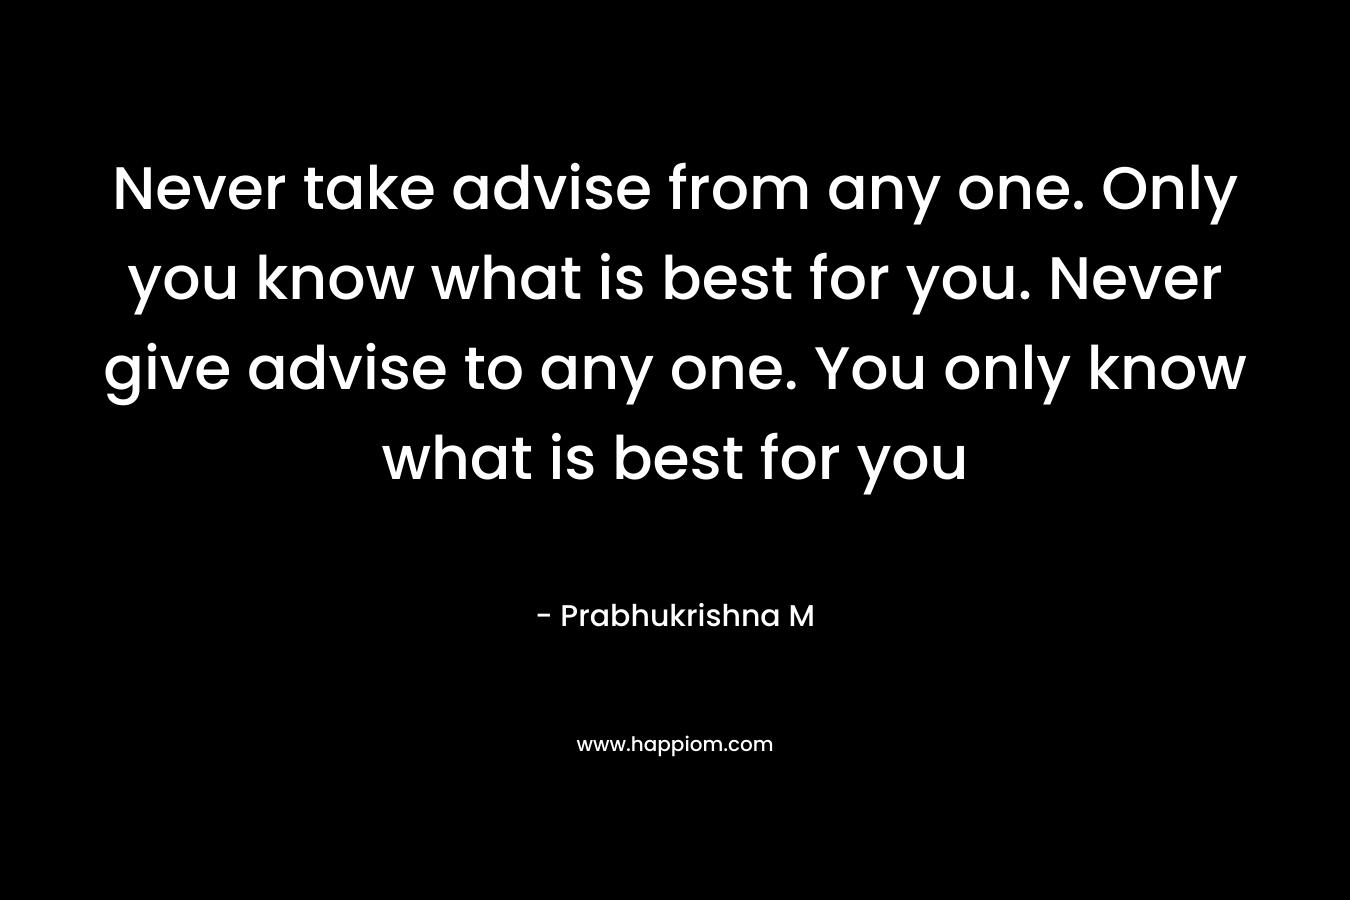 Never take advise from any one. Only you know what is best for you. Never give advise to any one. You only know what is best for you – Prabhukrishna M